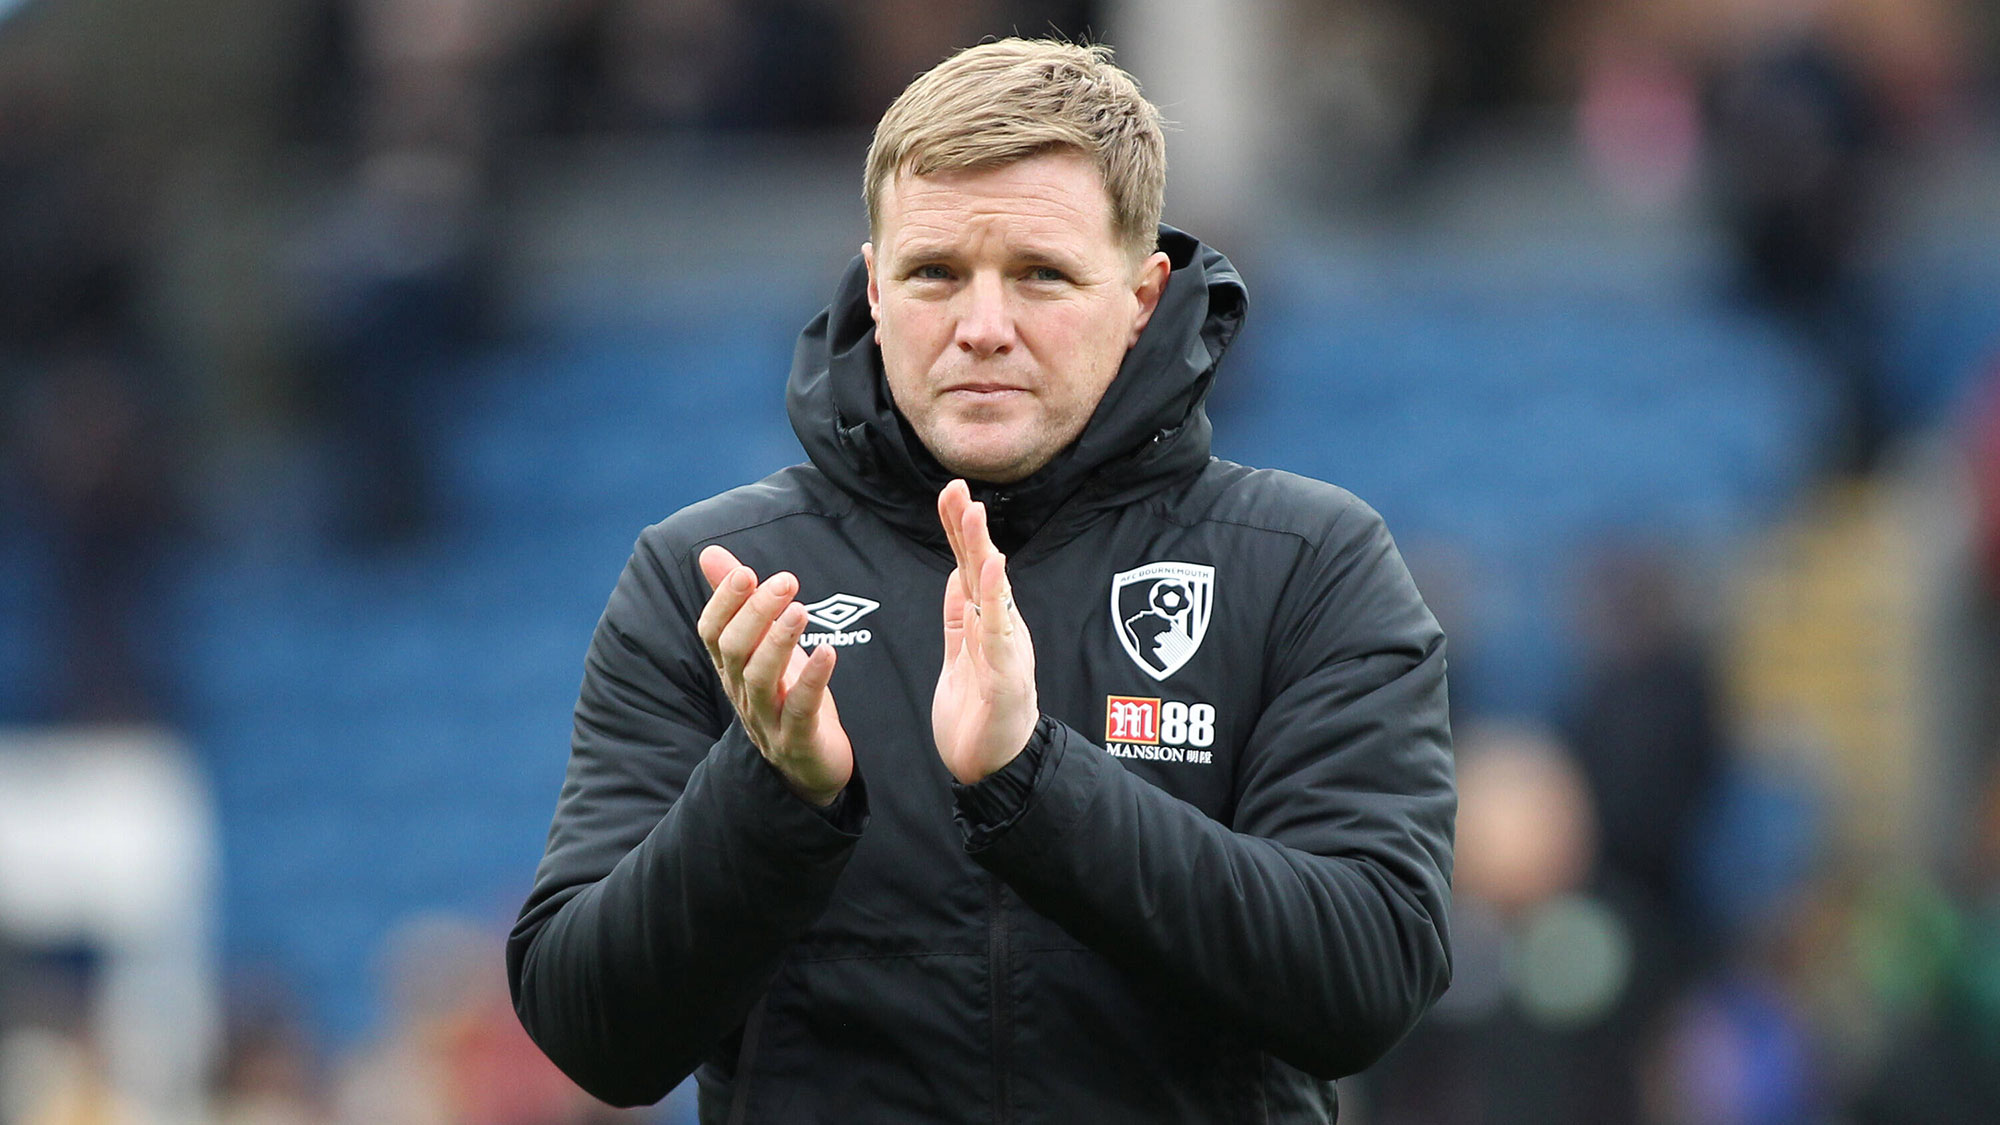 Newcastle hires Eddie Howe as its manager